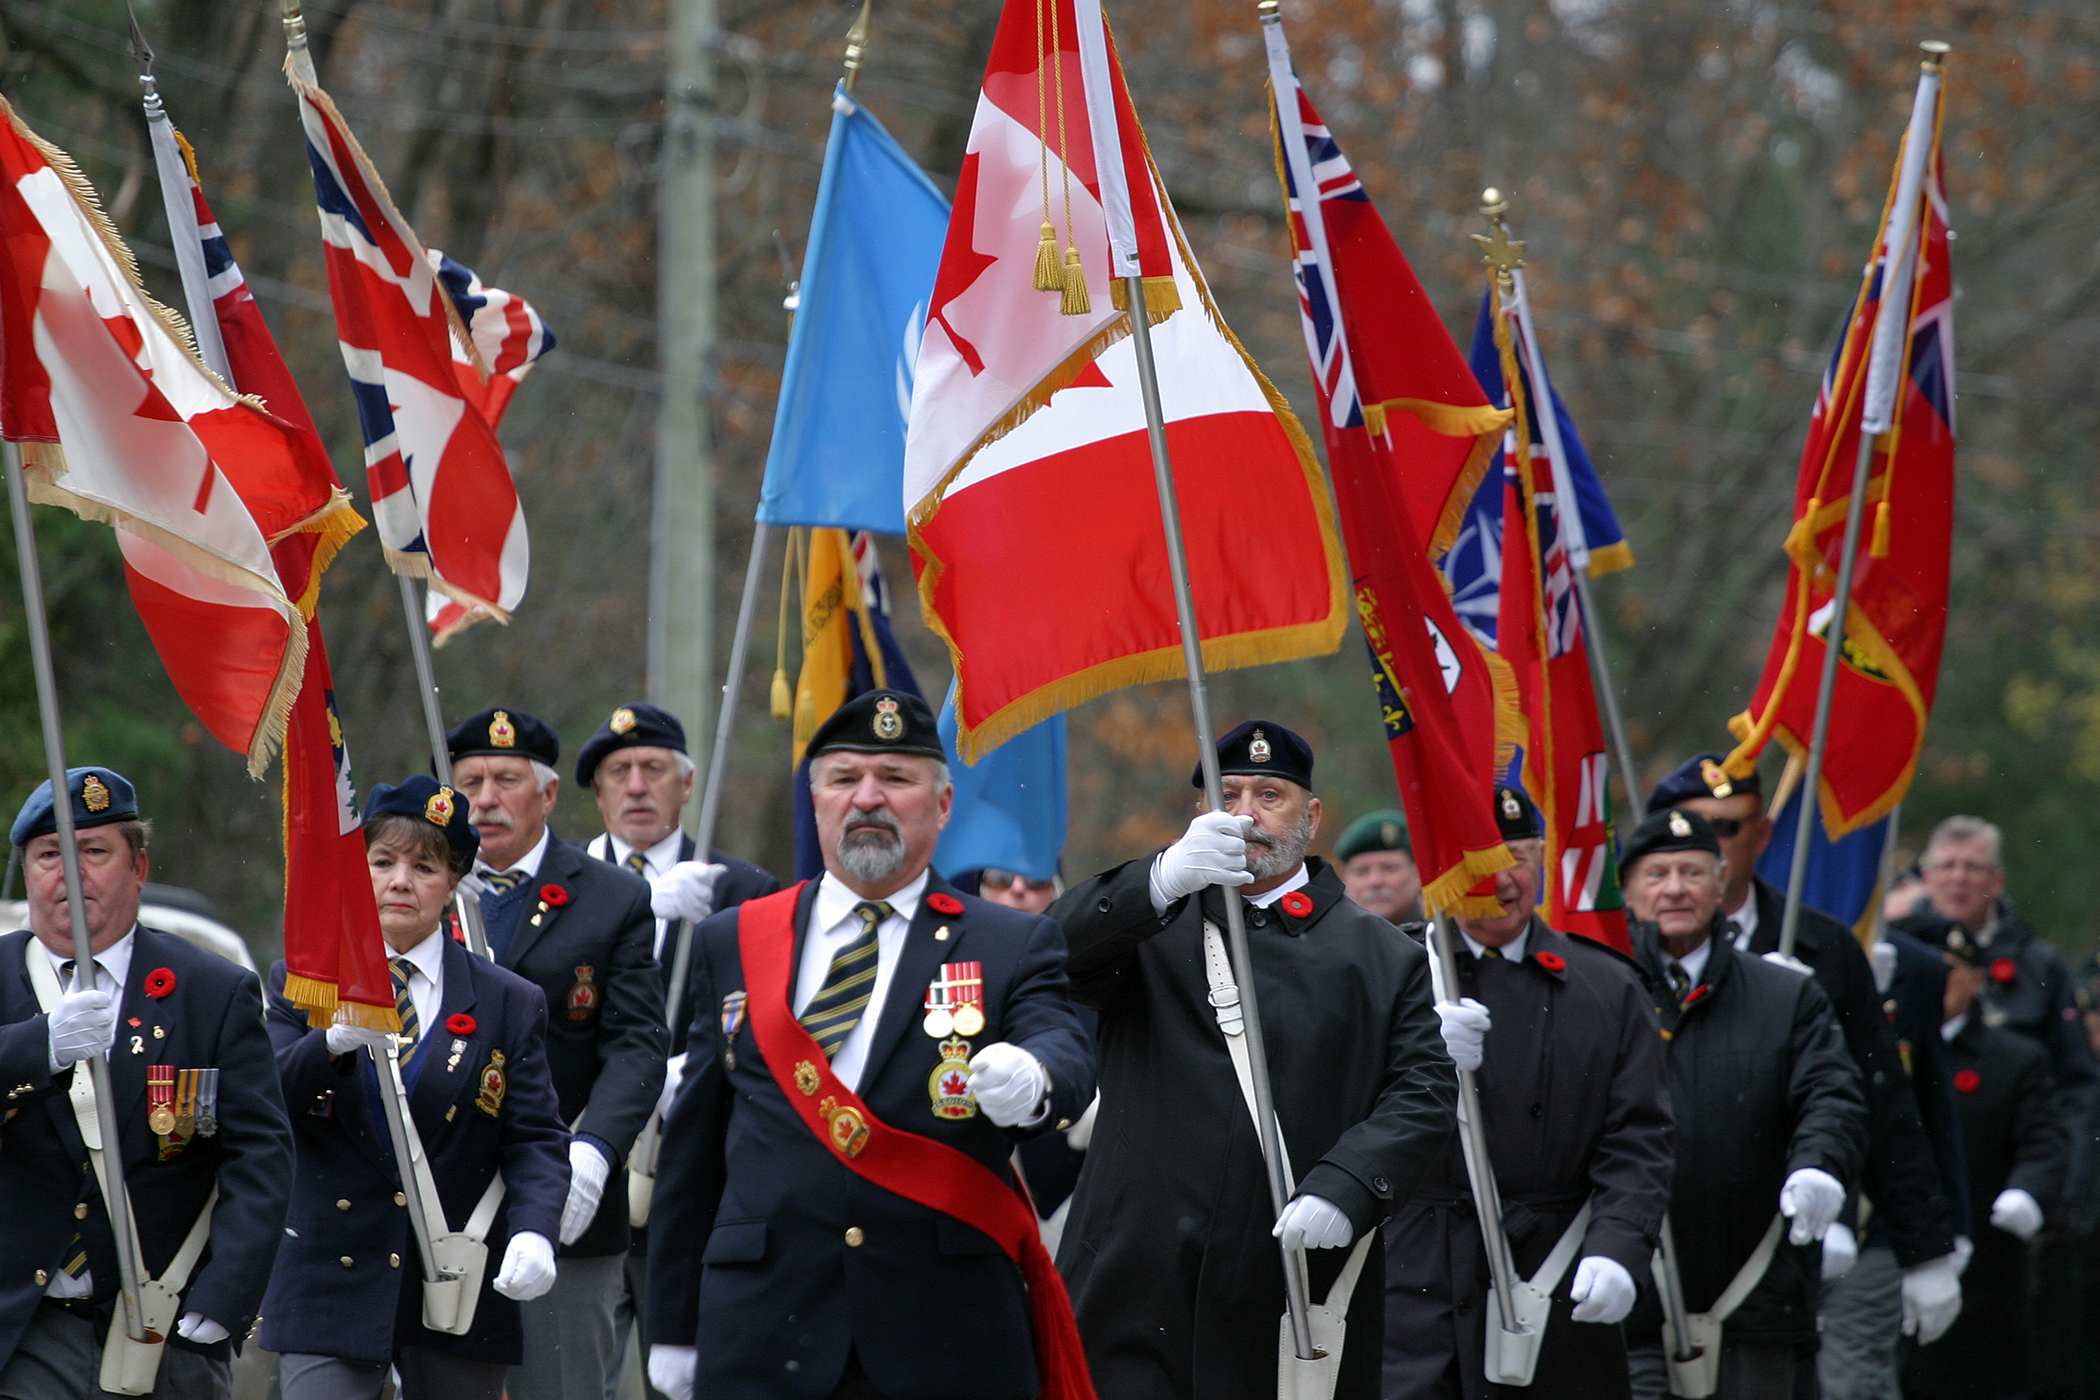 The Branch 616 colour party parades down Allbirch Street on its way to the Legion. Photo by Jake Davies